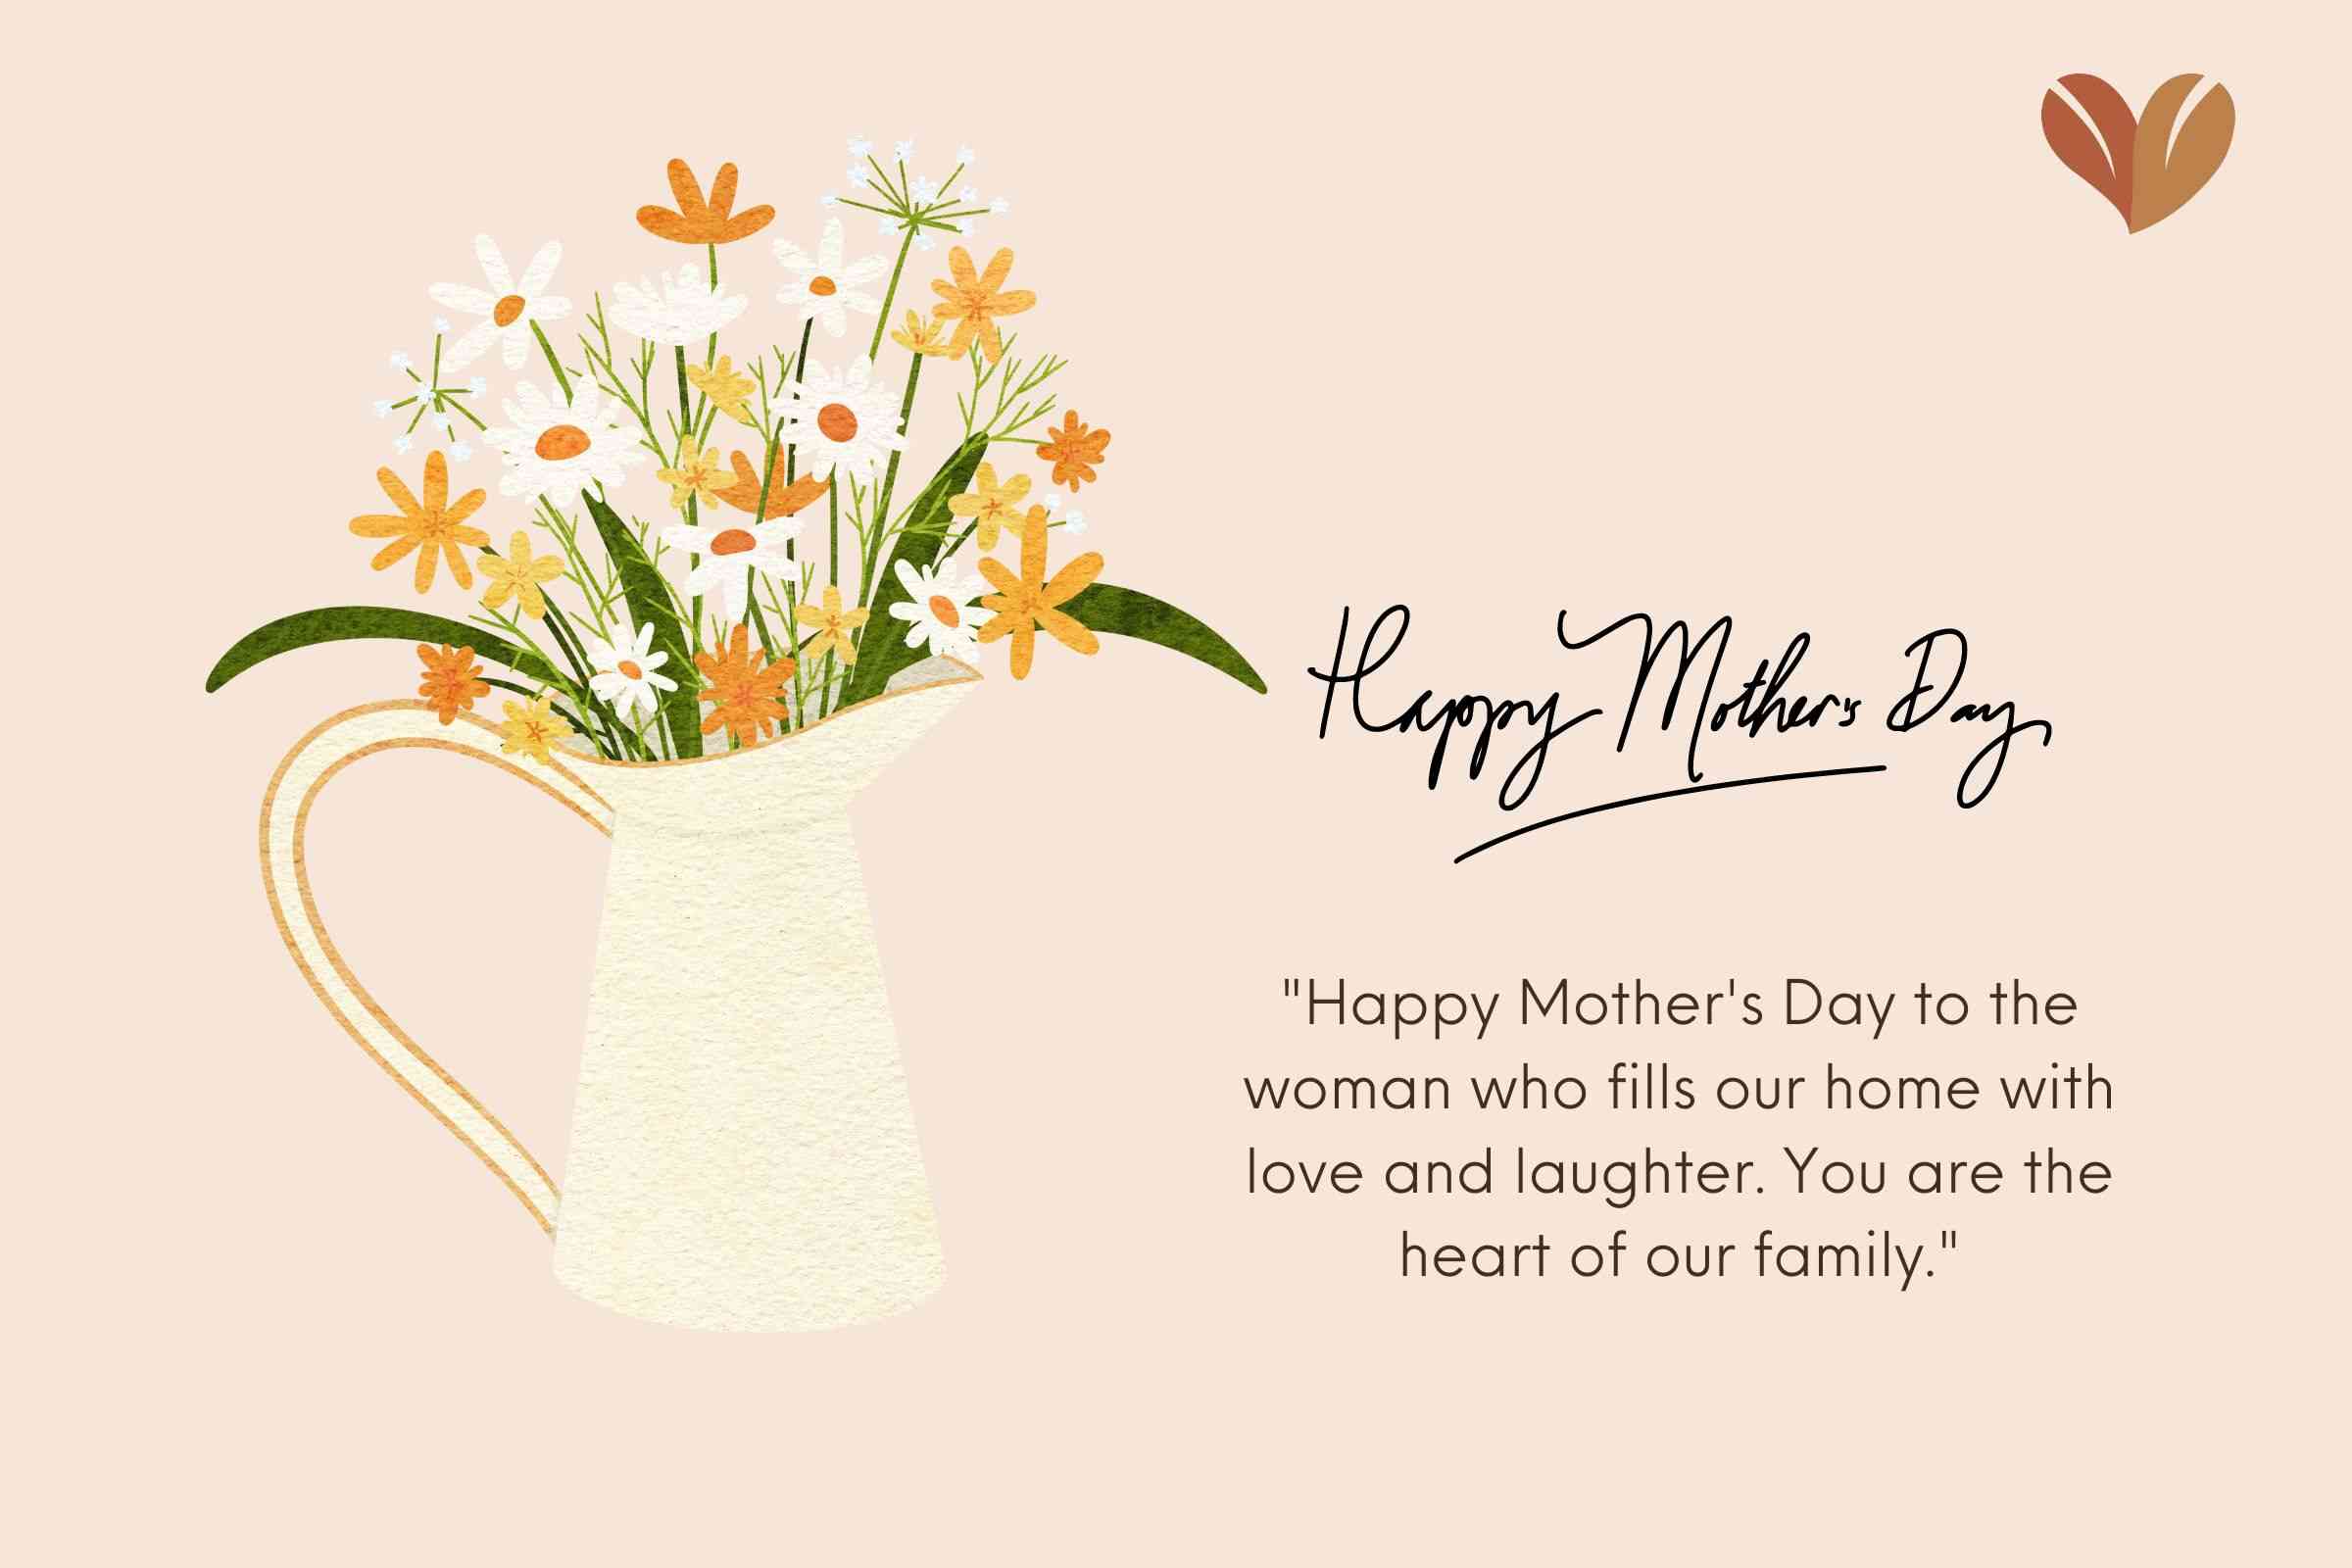 Happy mother's day messages to my wife - You are the heart of our family.